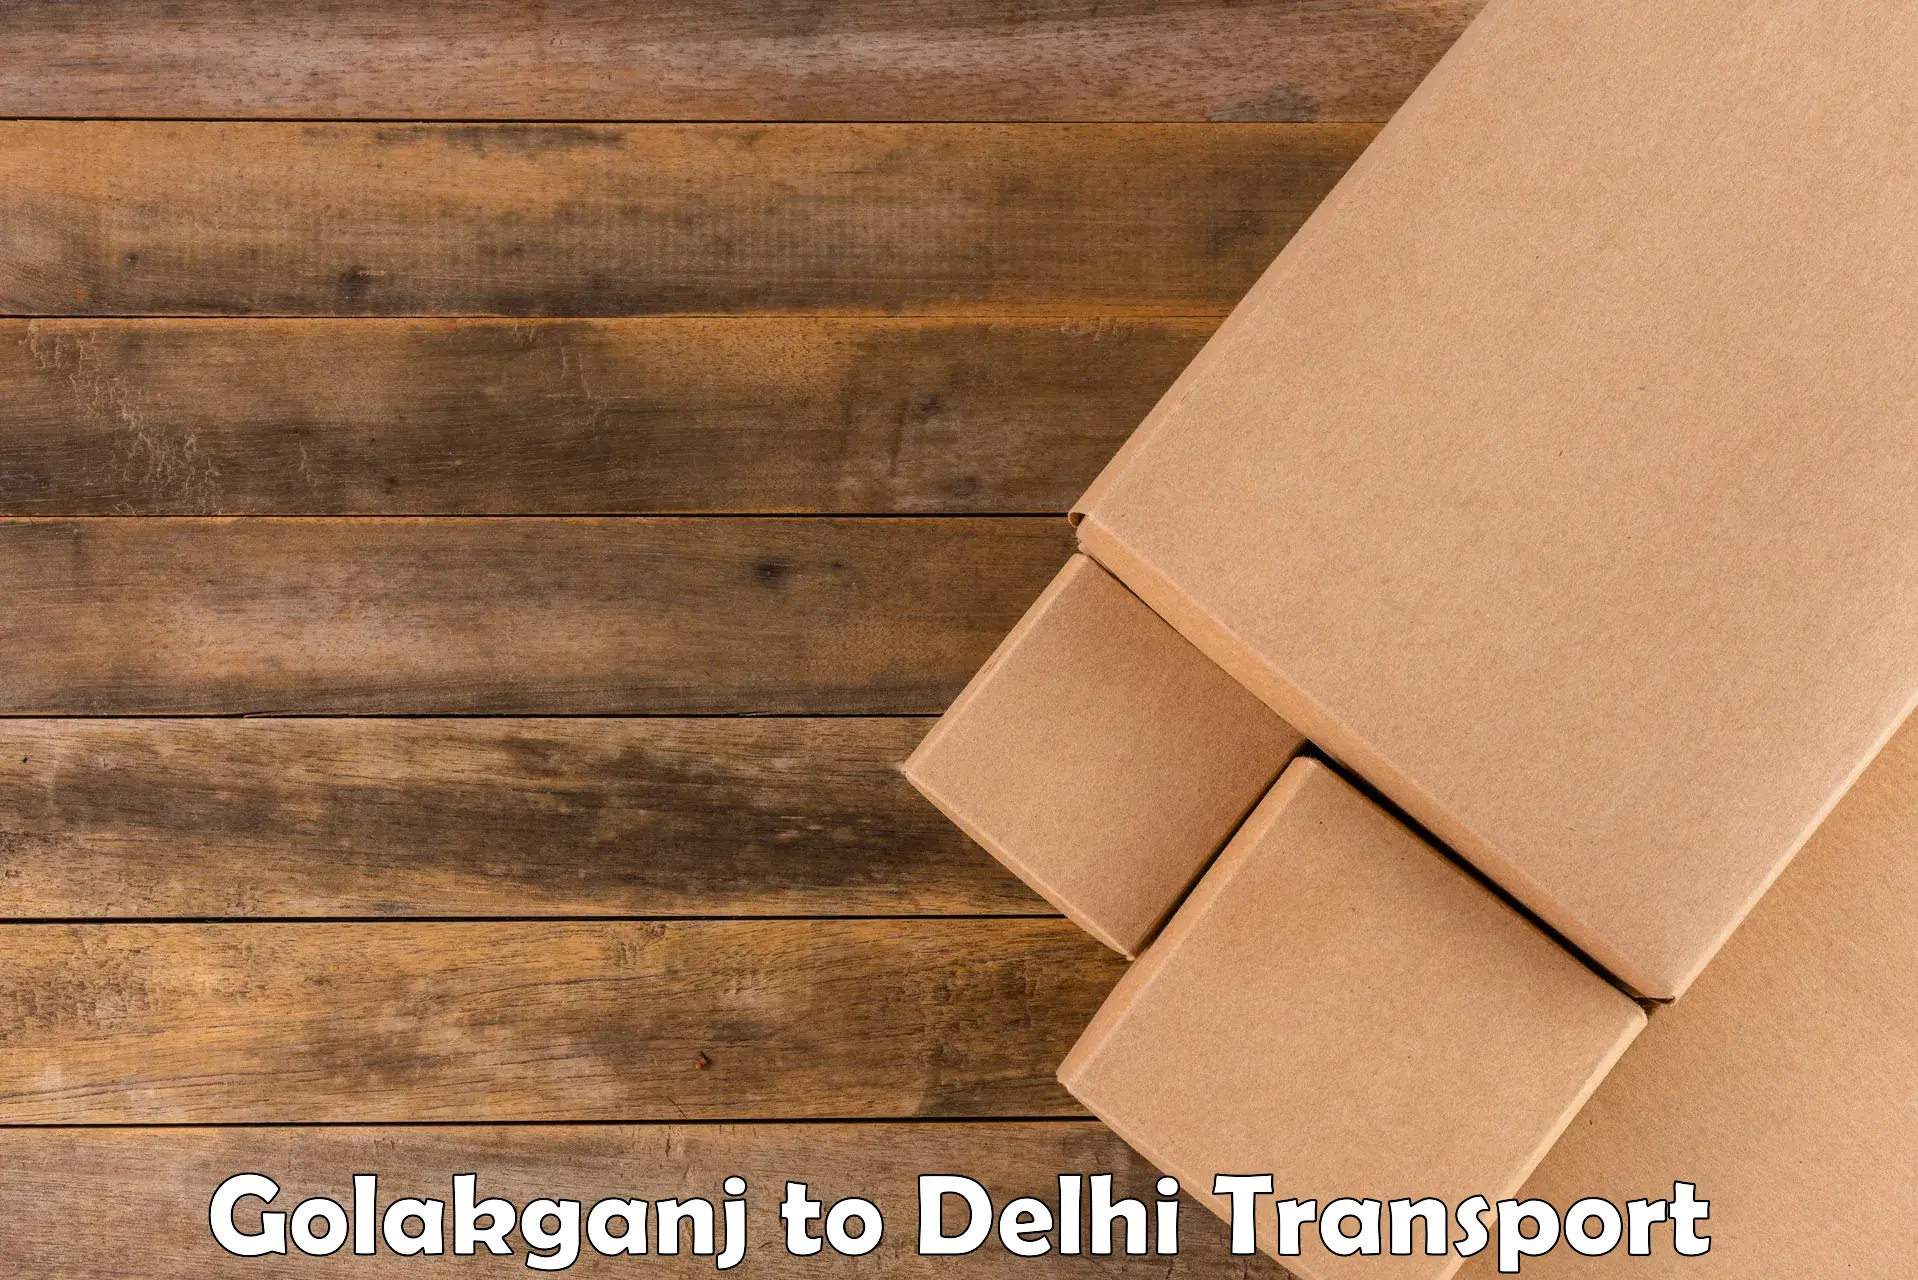 Air freight transport services Golakganj to NCR